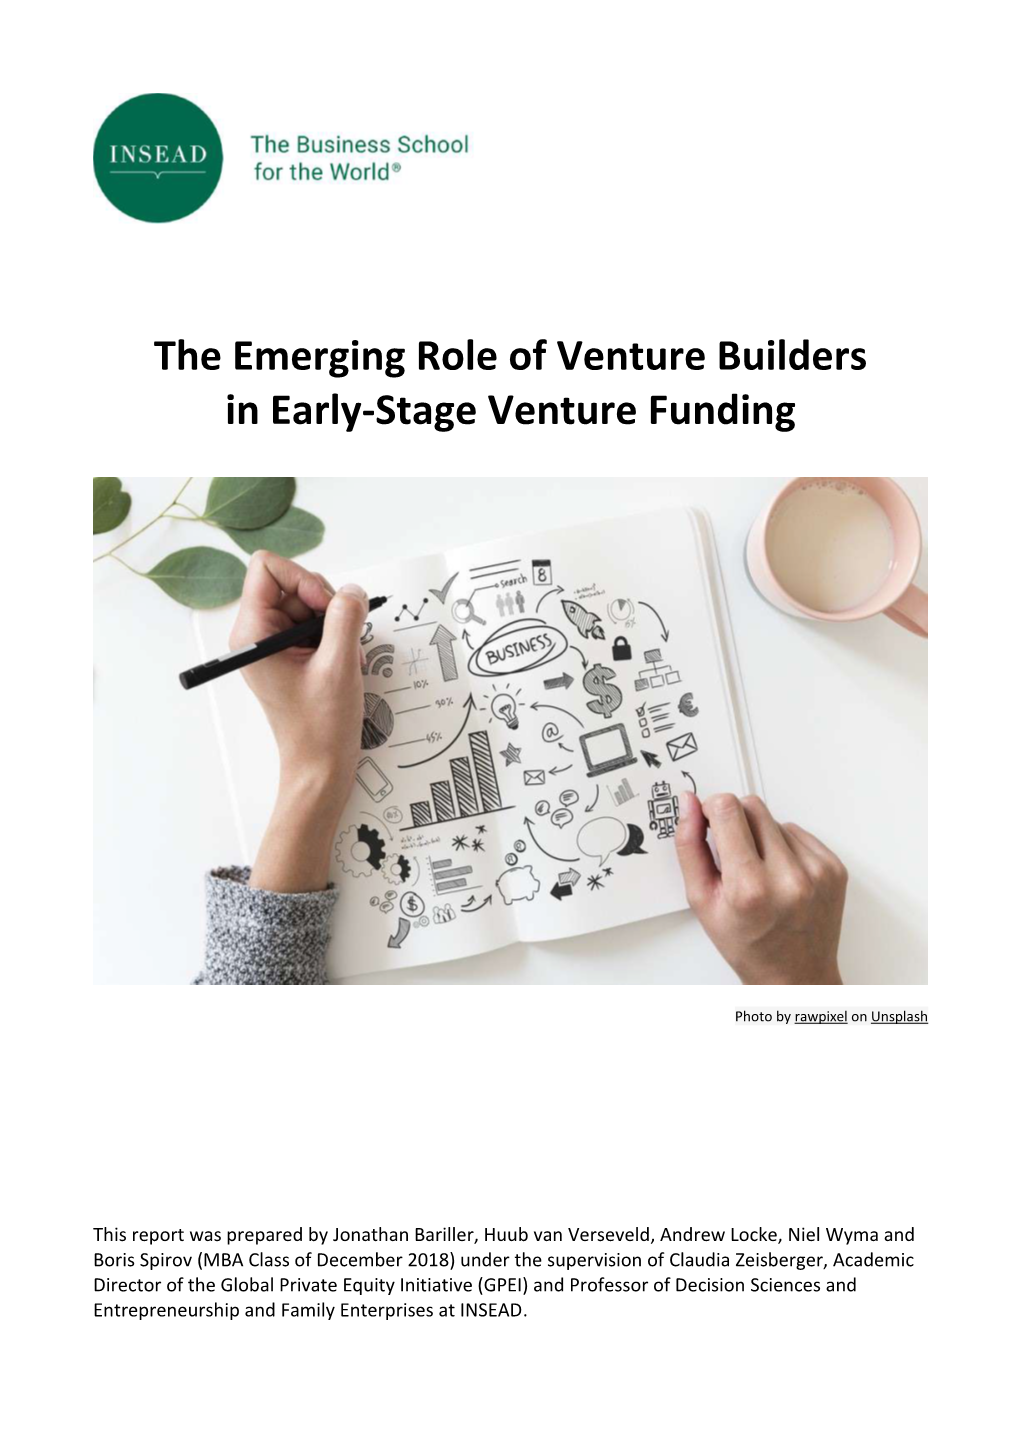 The Emerging Role of Venture Builders in Early-Stage Venture Funding